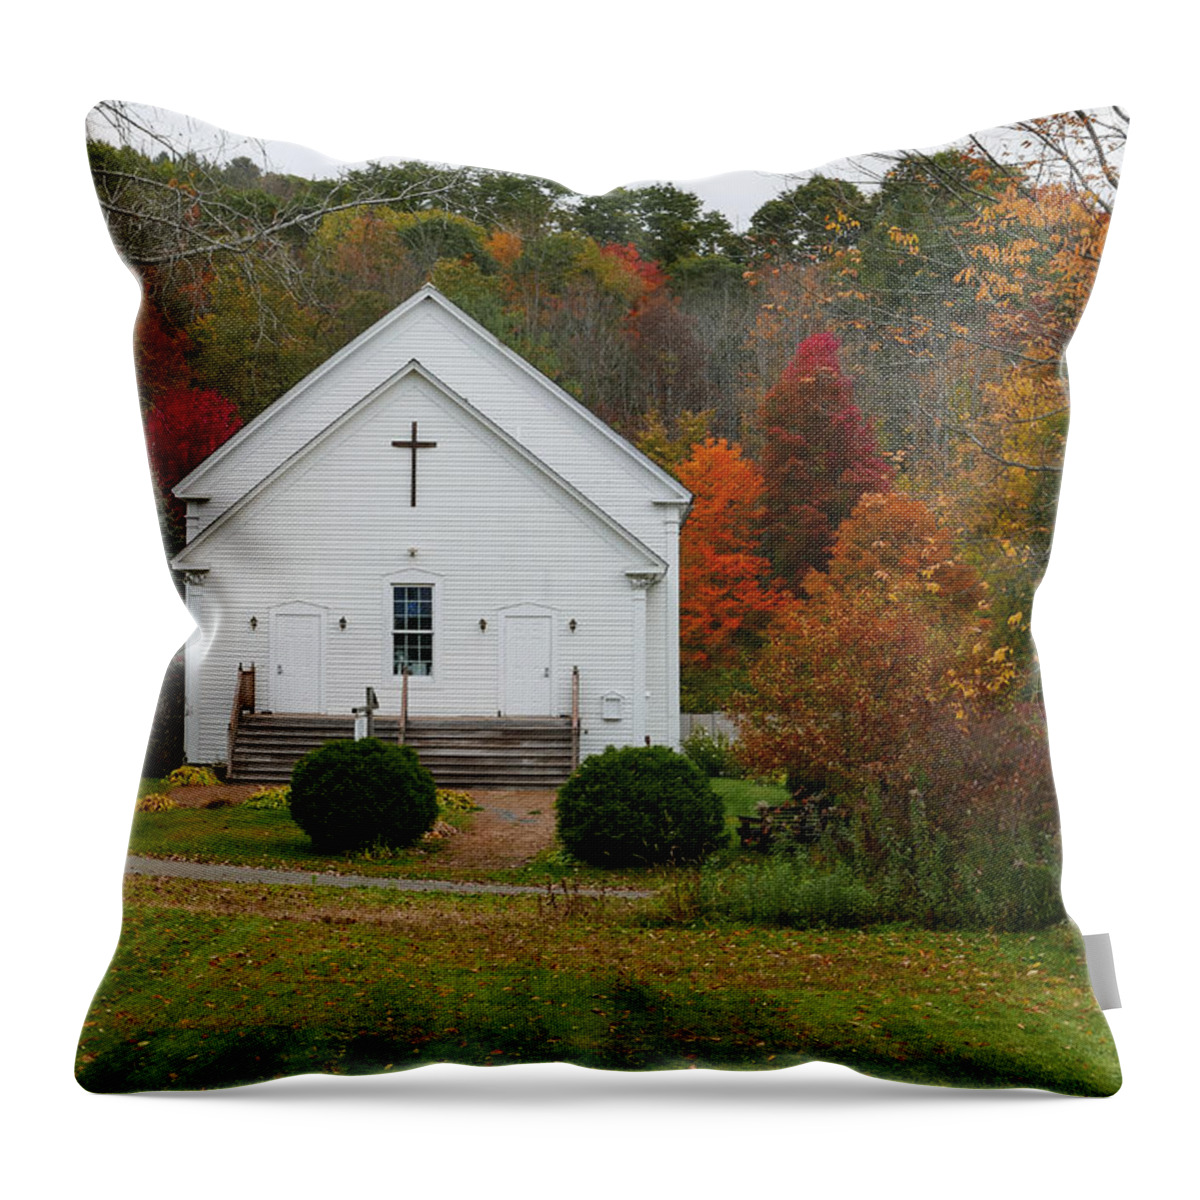 New England Church Throw Pillow featuring the photograph Old New England Church in Colorful Fall Foliage by Robert Bellomy